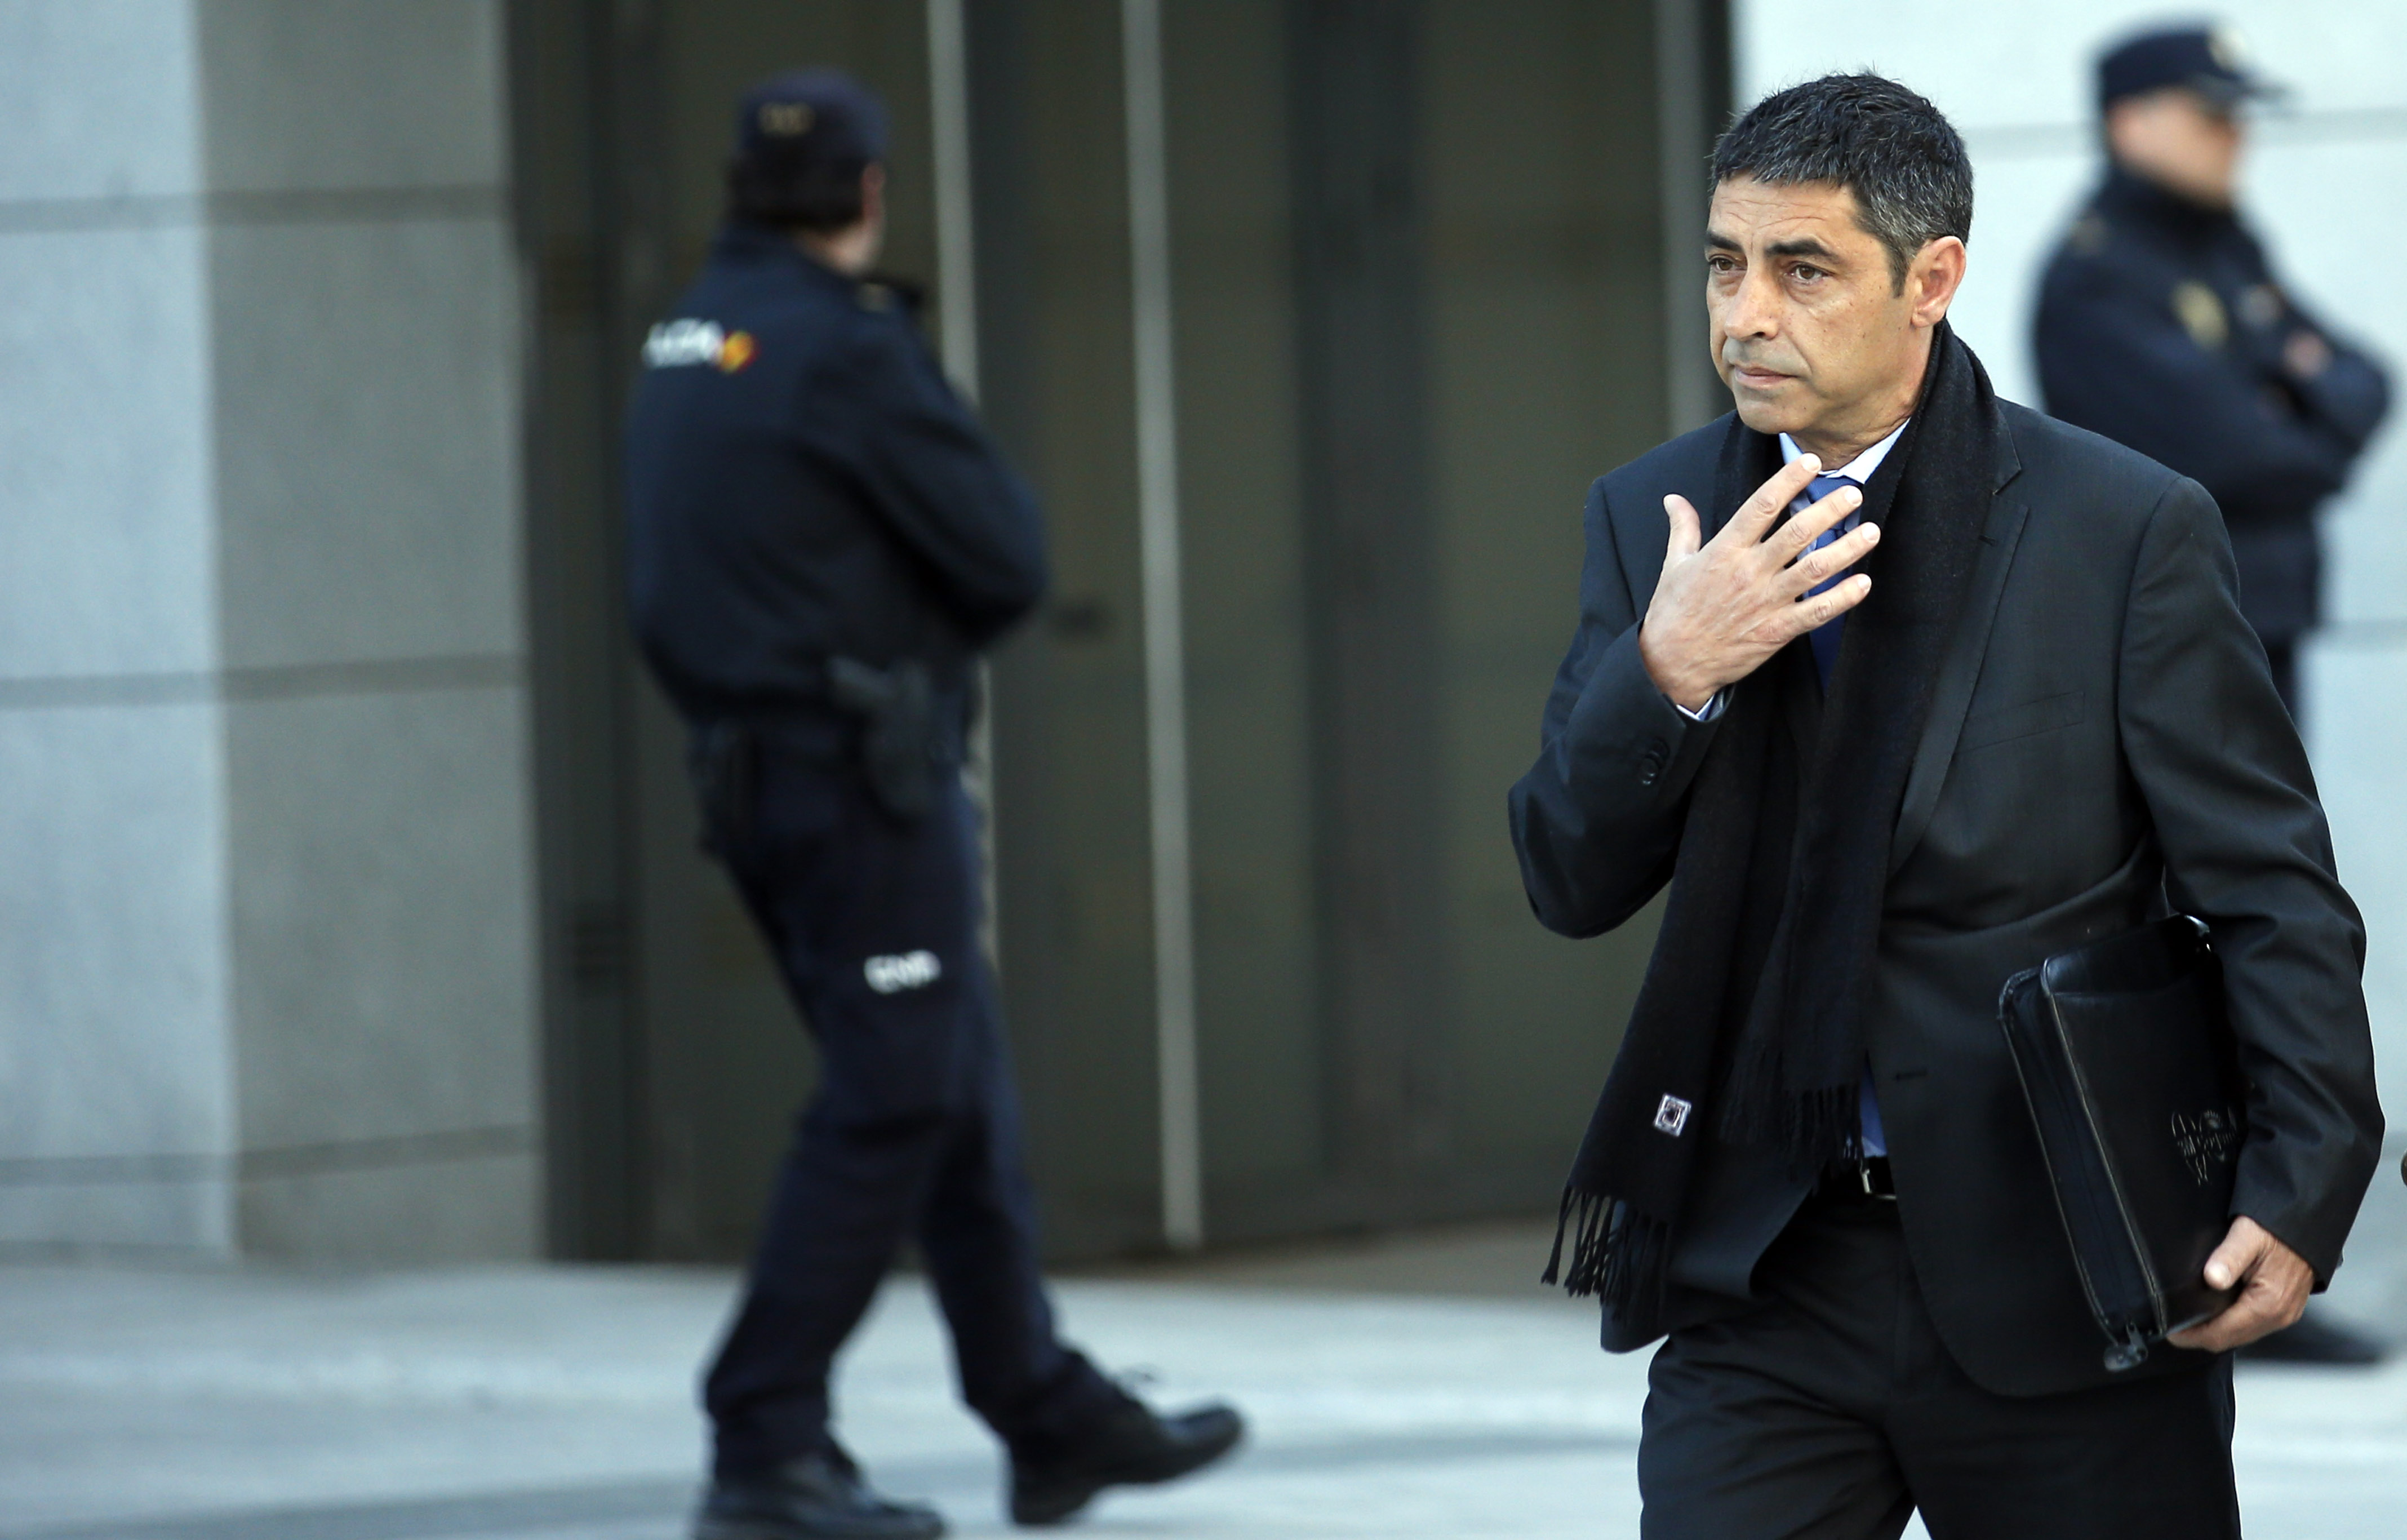 Former Catalan police chief Josep Lluís Trapero at the Spanish National Court on April 16 2018 (by Javier Barbancho / ACN)